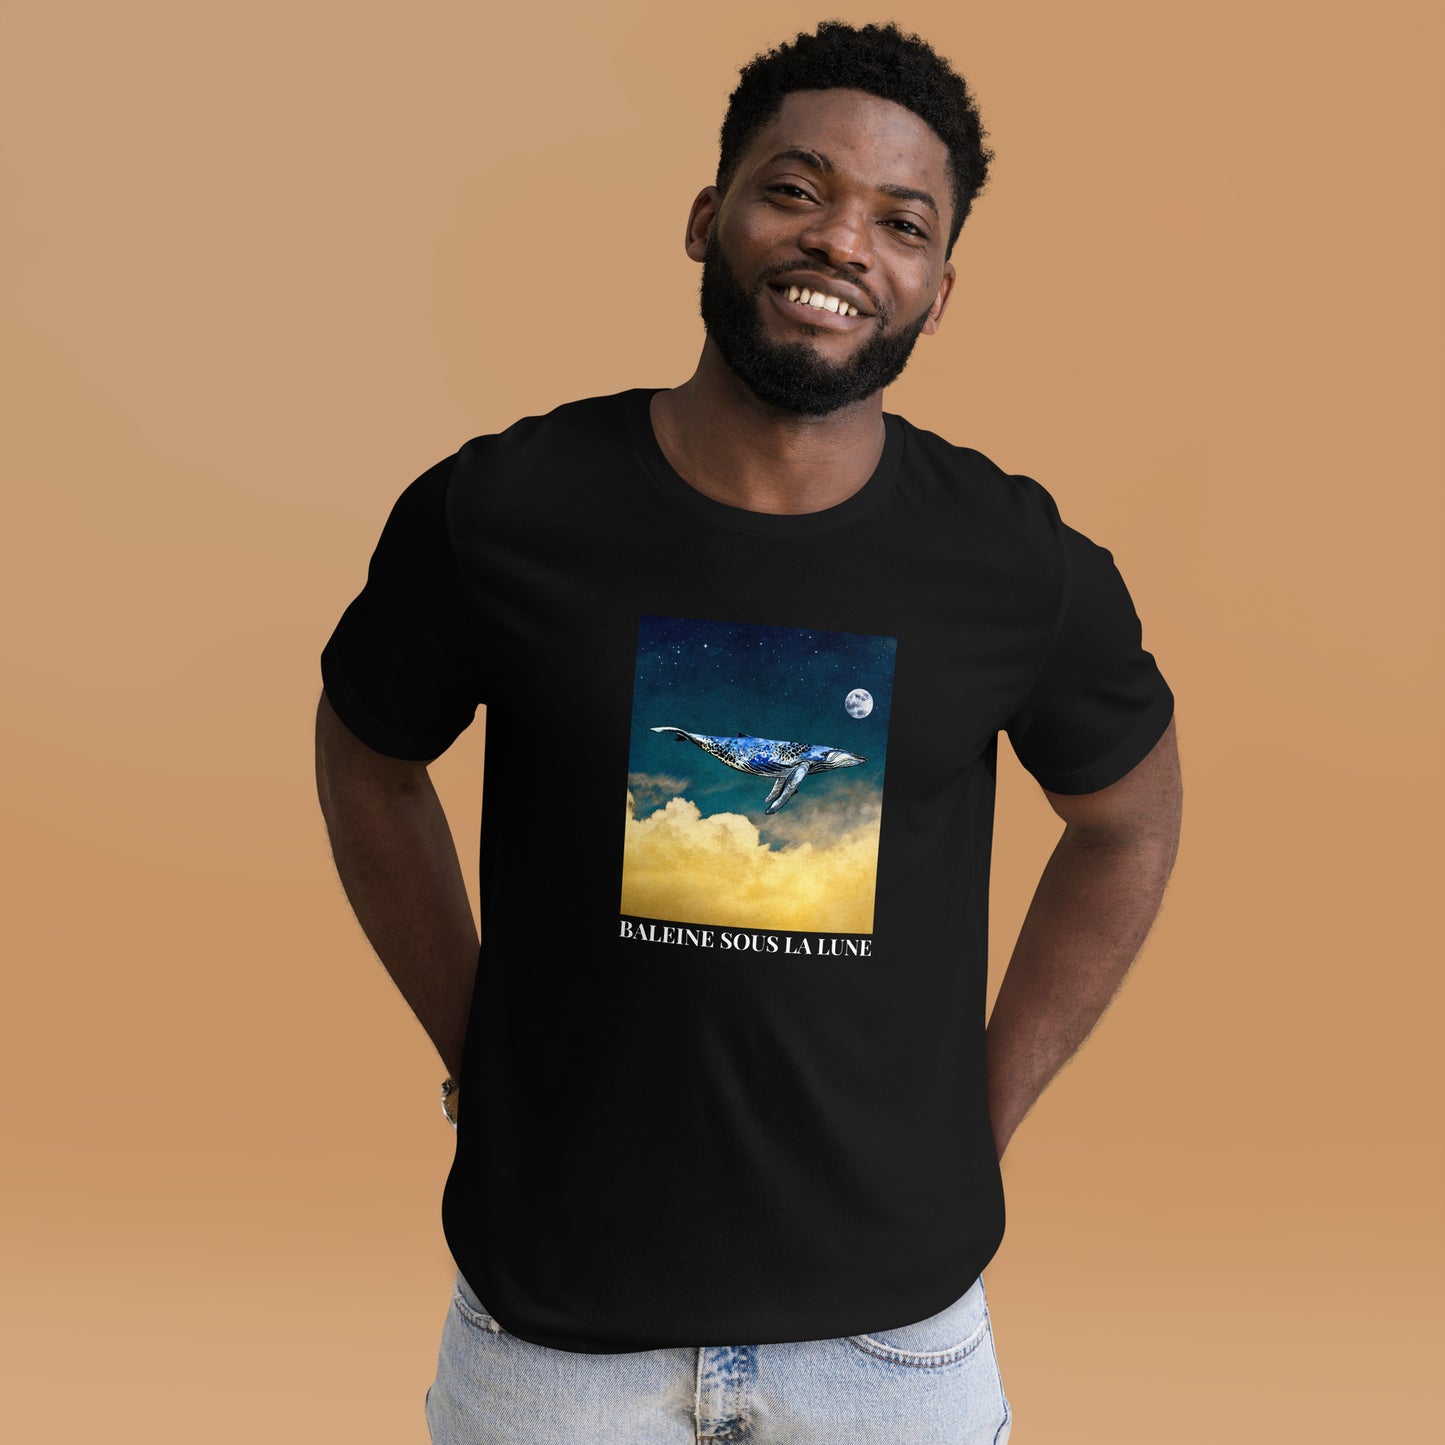 Smiling Man wearing a Black Premium Whale T-Shirt featuring a majestic Whale Under The Moon graphic on the chest - Cool Graphic Whale Tees - Boozy Fox